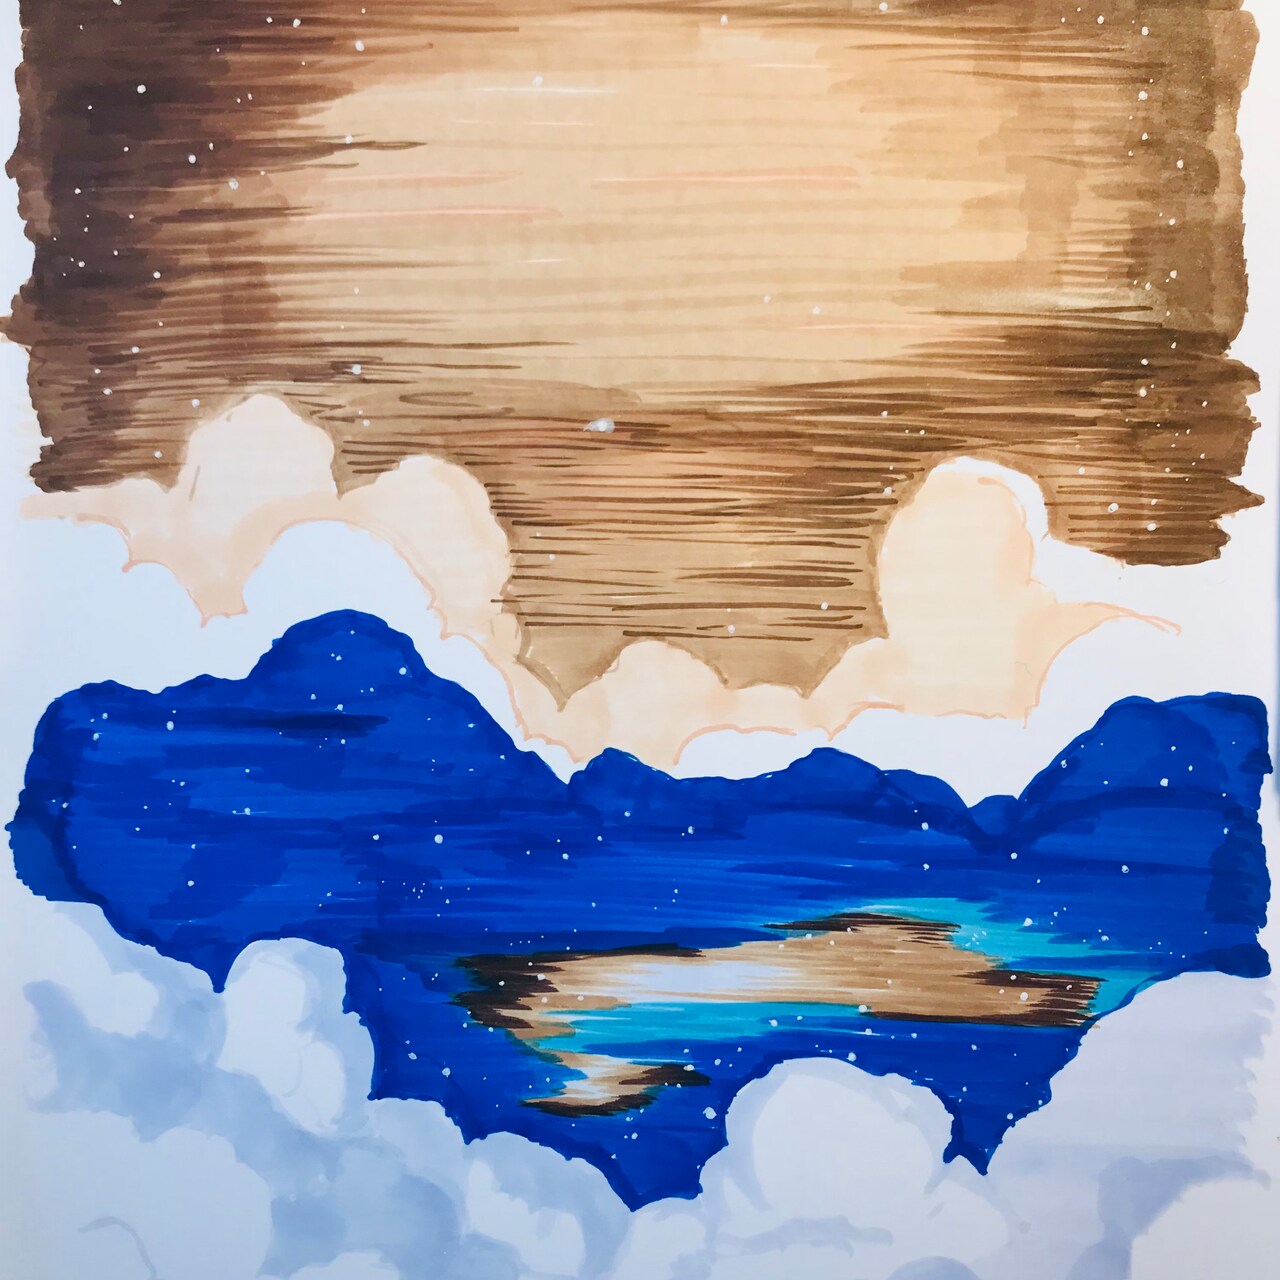 Alcohol-Based Markers Ethereal Cloudscape with @AdrienneHodgeArt, Part II